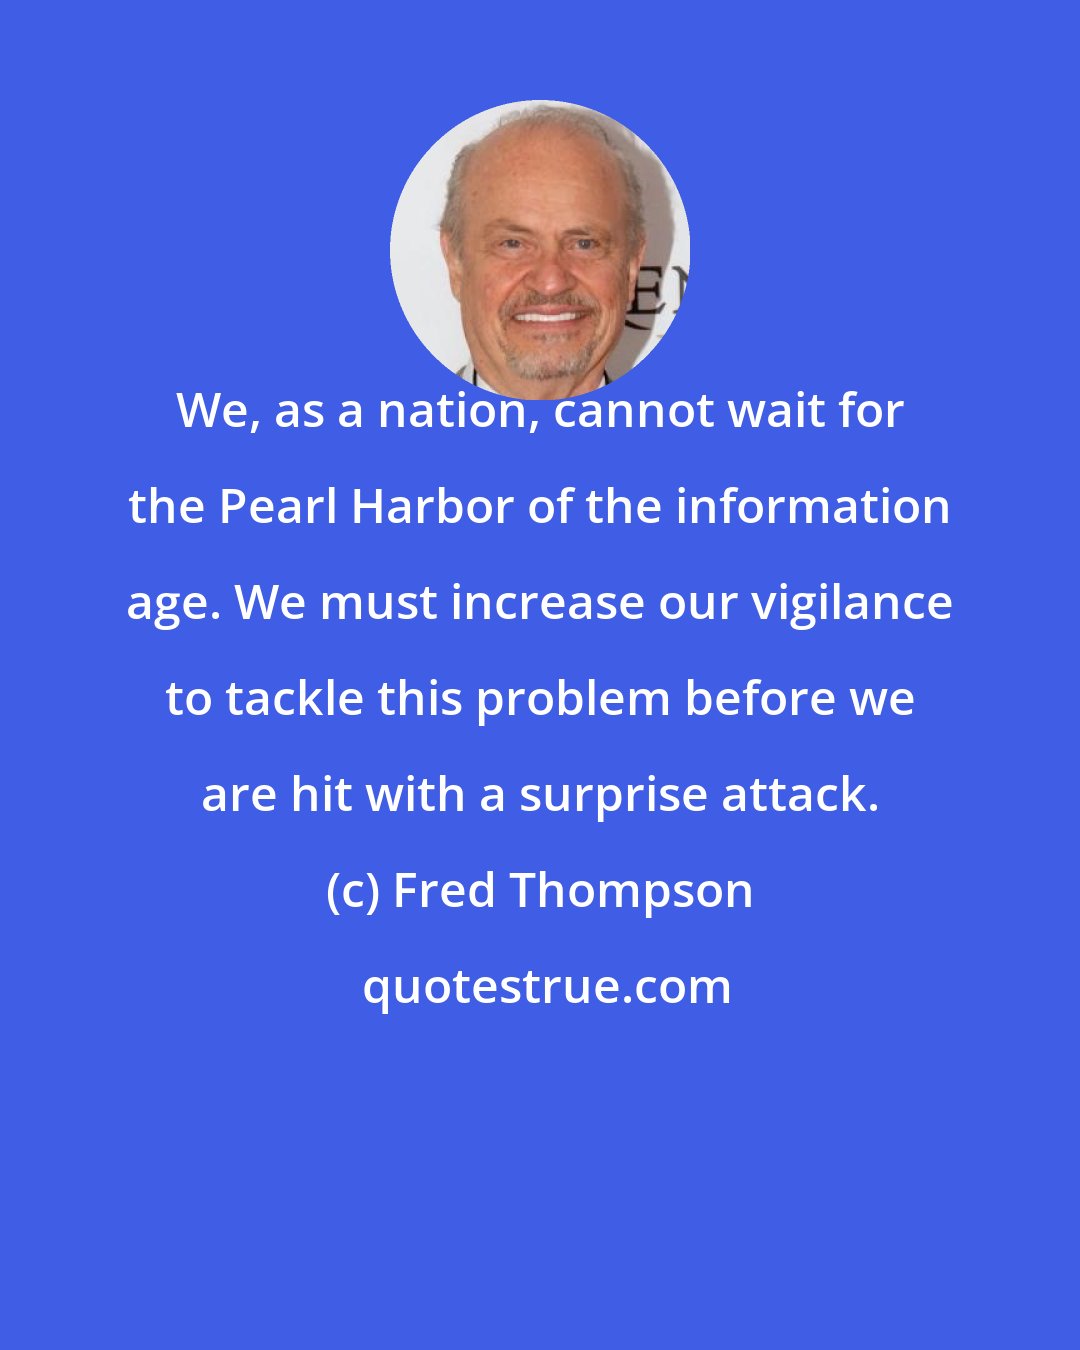 Fred Thompson: We, as a nation, cannot wait for the Pearl Harbor of the information age. We must increase our vigilance to tackle this problem before we are hit with a surprise attack.